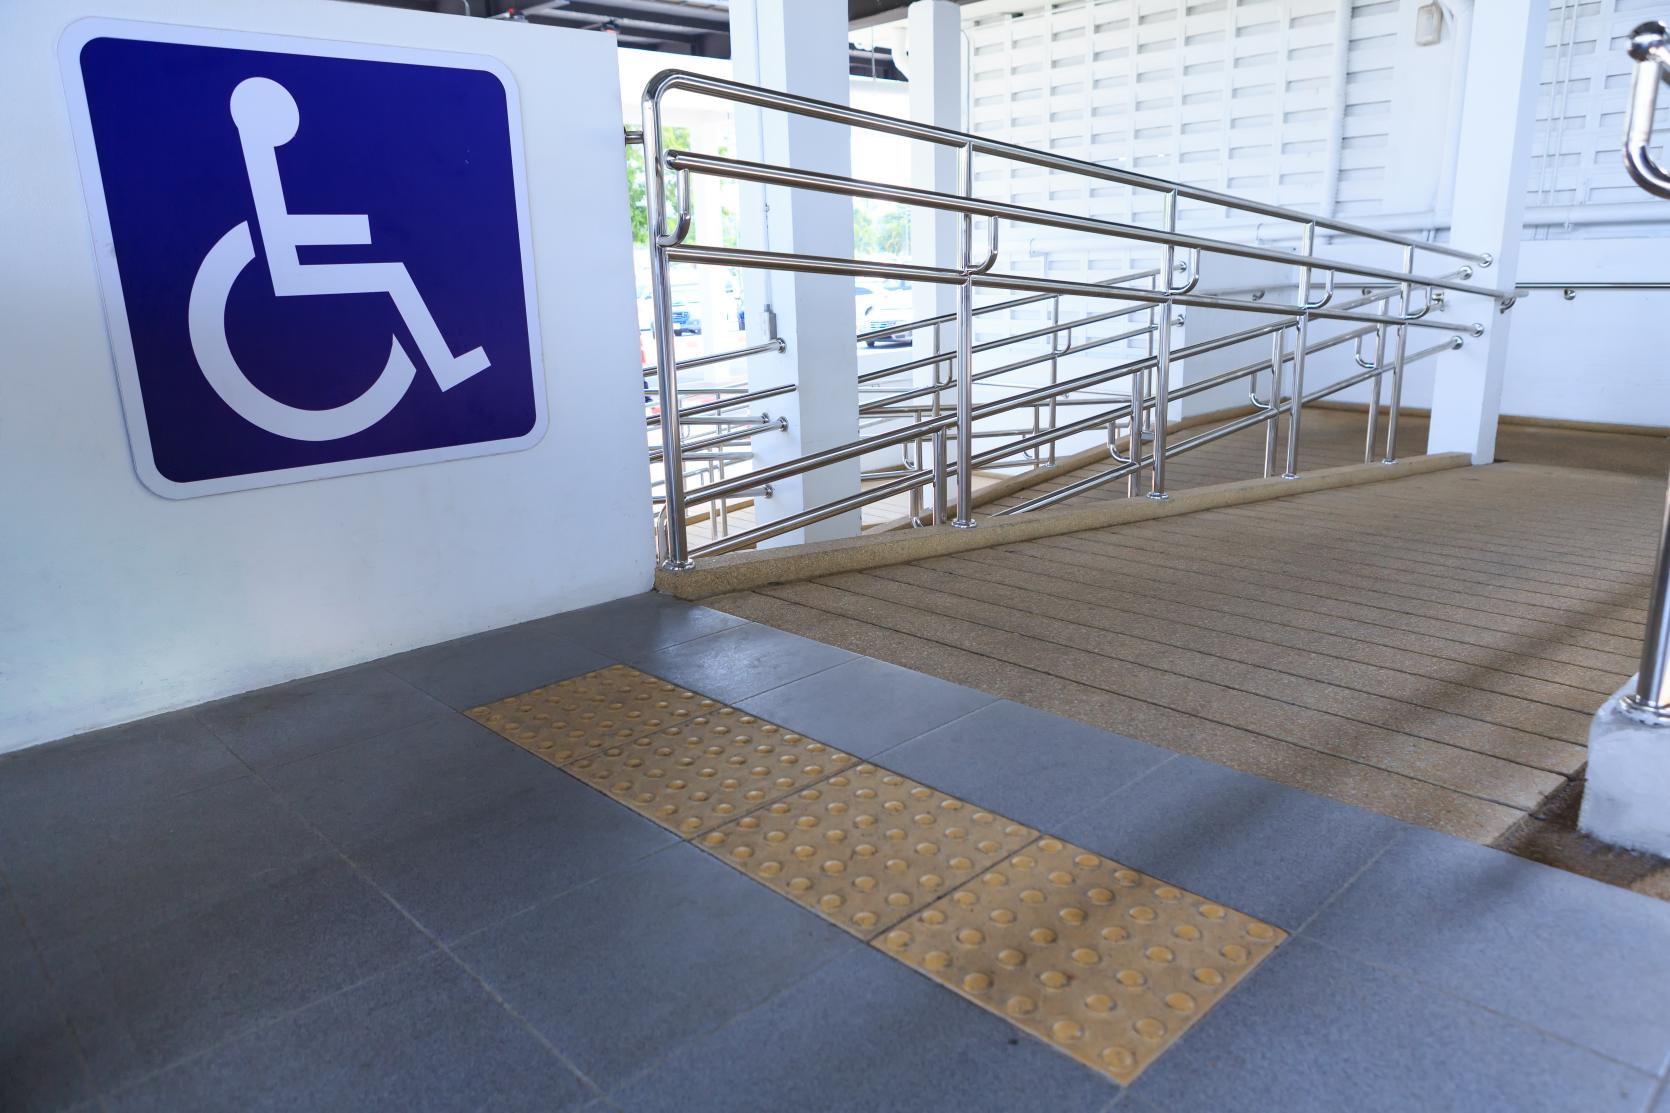 Concrete wraparound wheelchair ramp with stainless steel handrail that comes up to a platform. The platform has a yellow truncated dome surface and a large accessible sign.